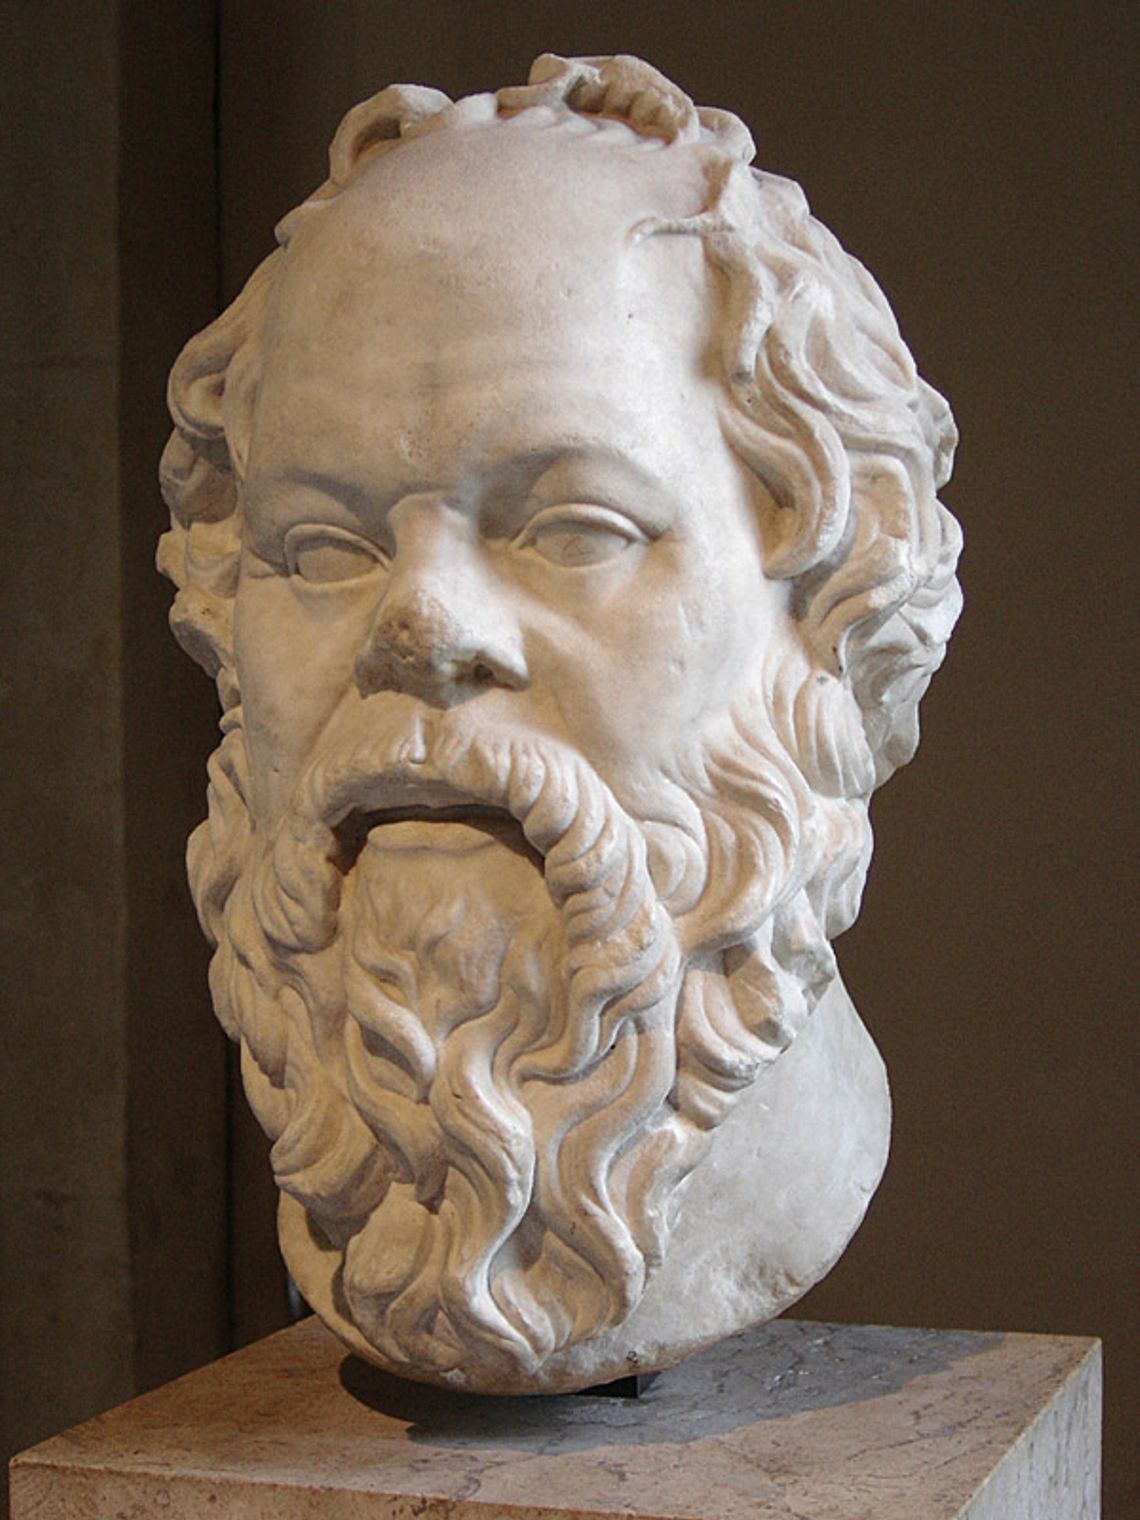 Bust of Socrates in the Louvre